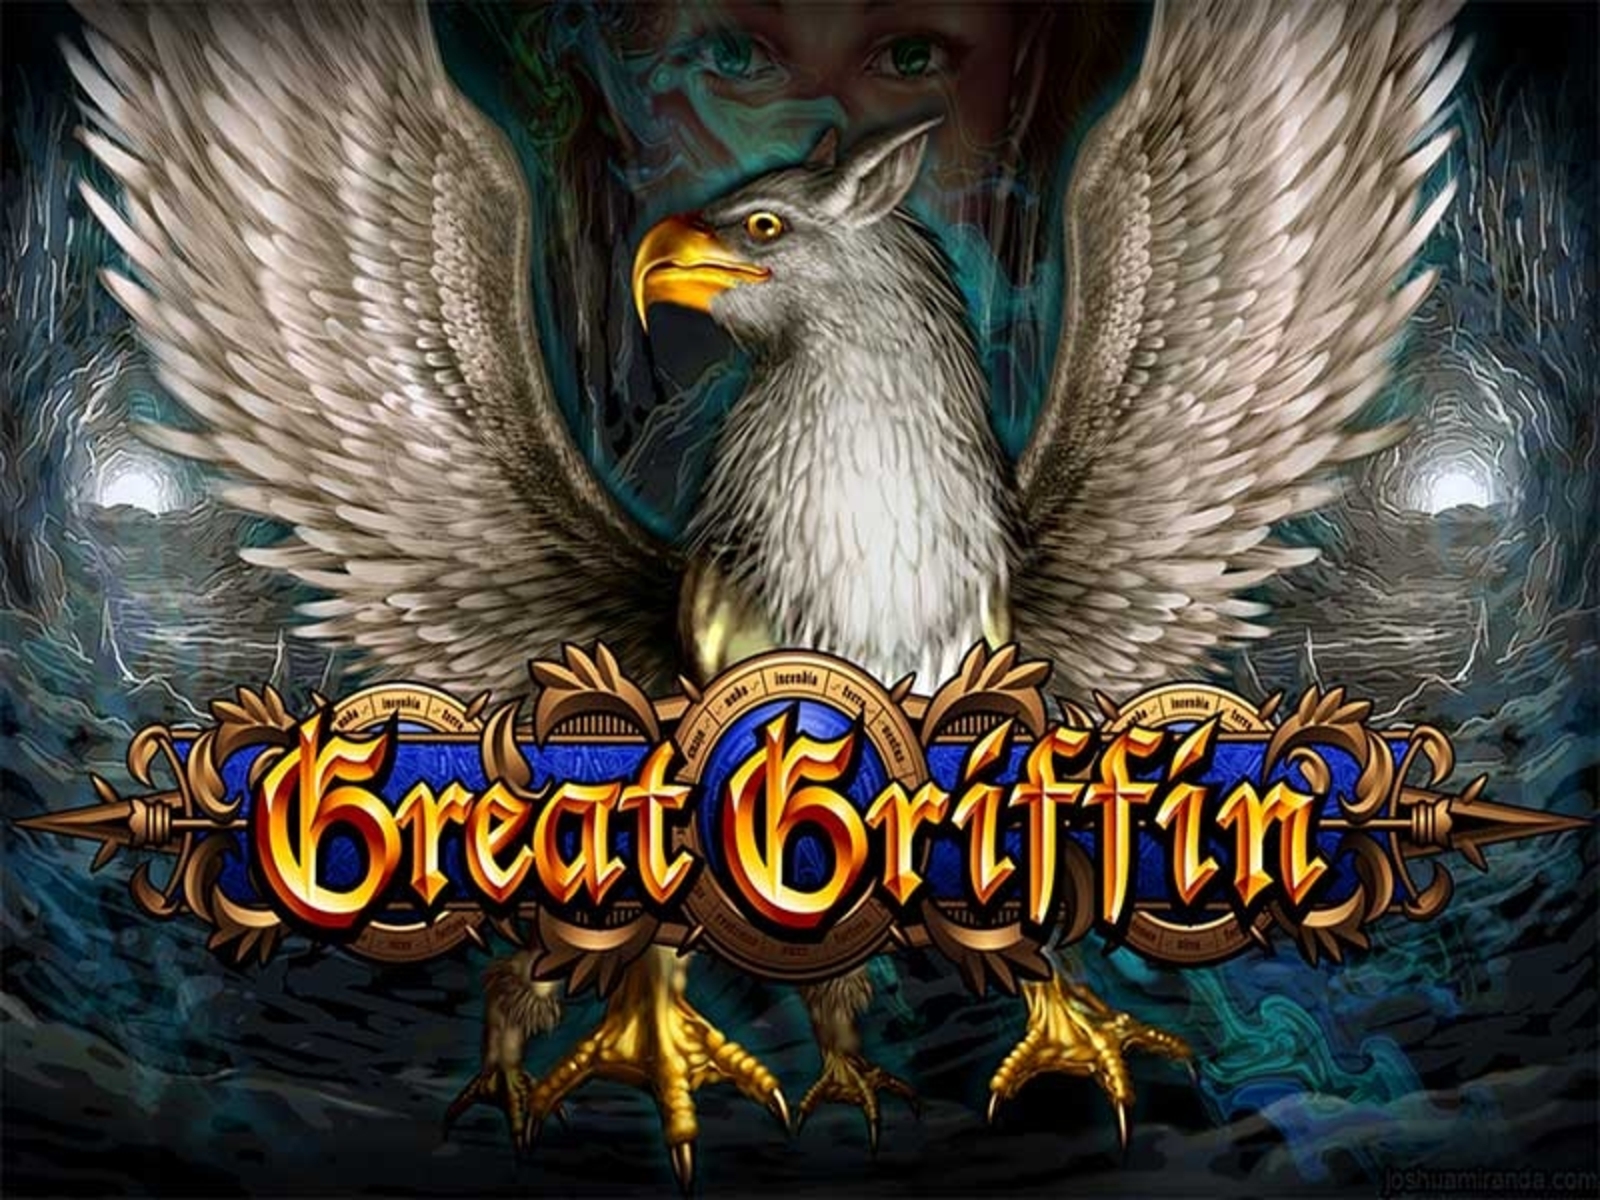 The Great Griffin Online Slot Demo Game by Microgaming